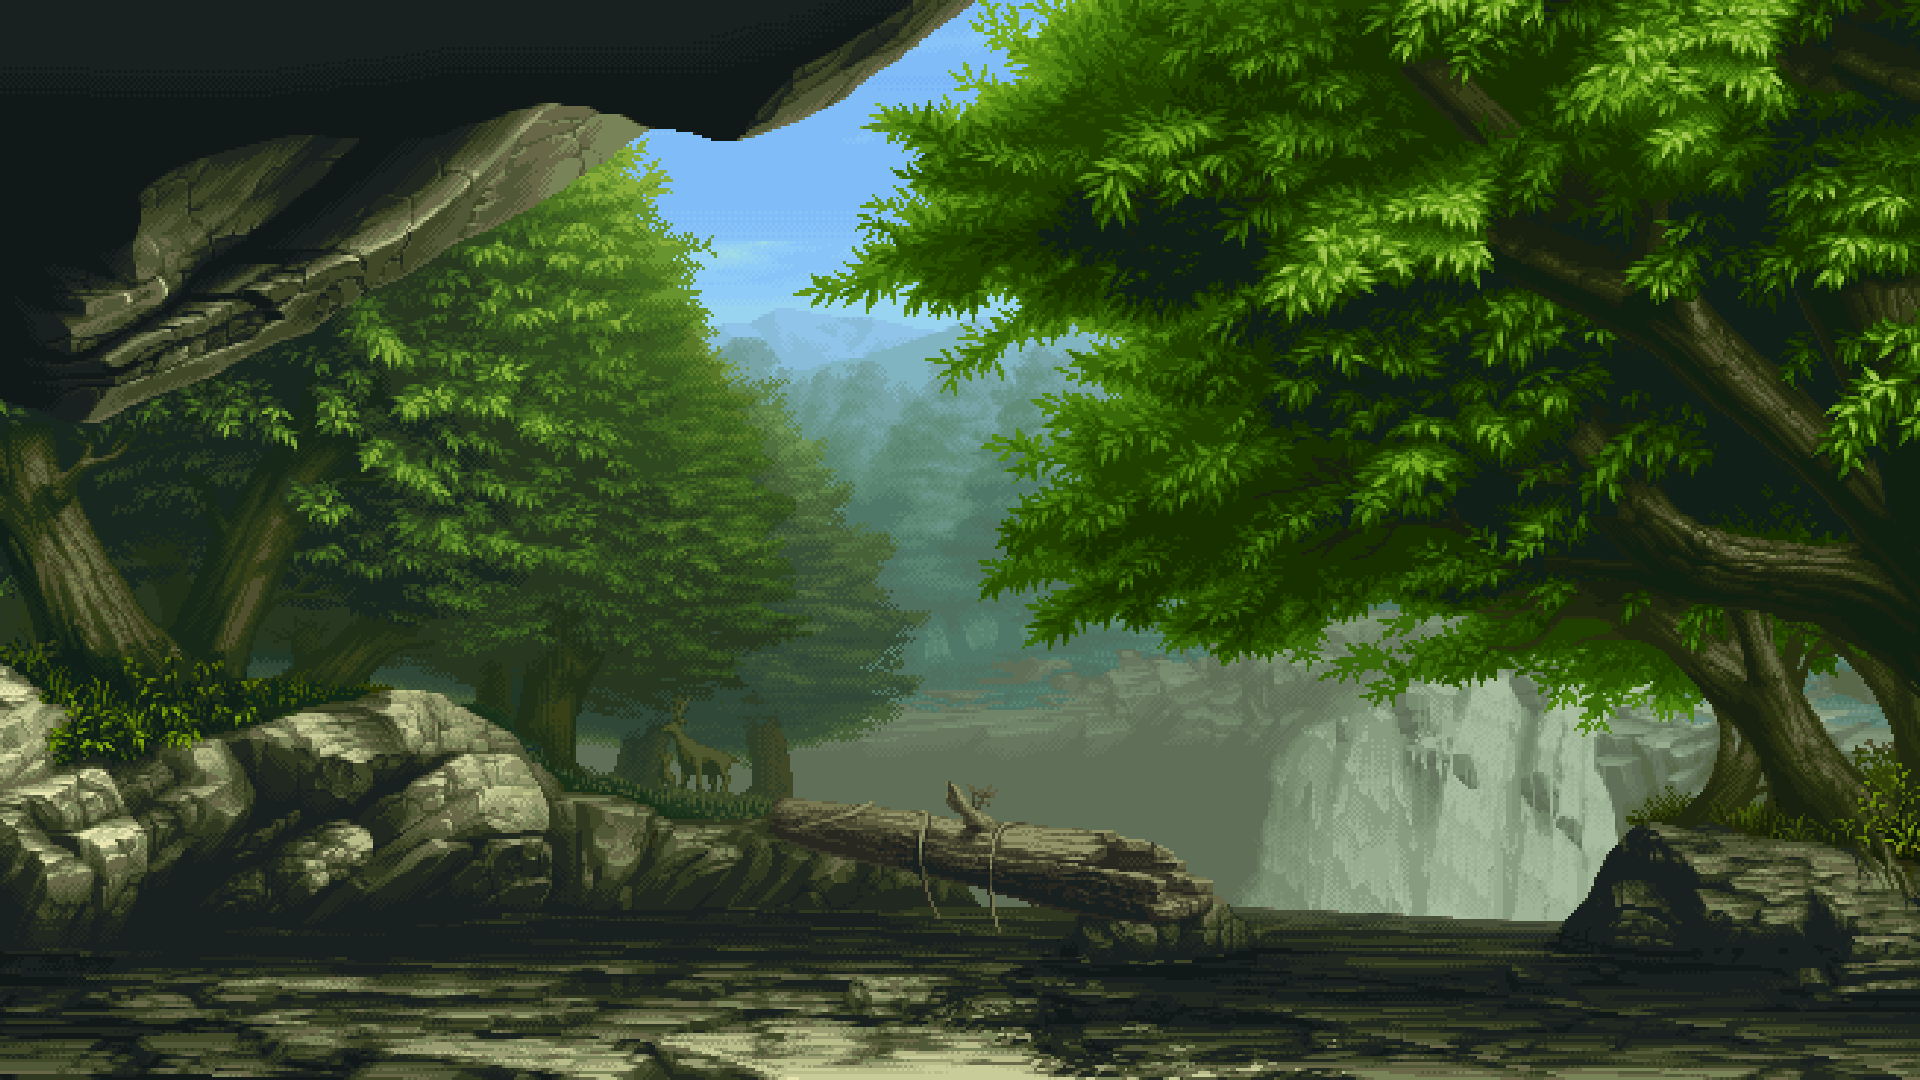 Pixel Forest Wallpaper Free Pixel Forest Background